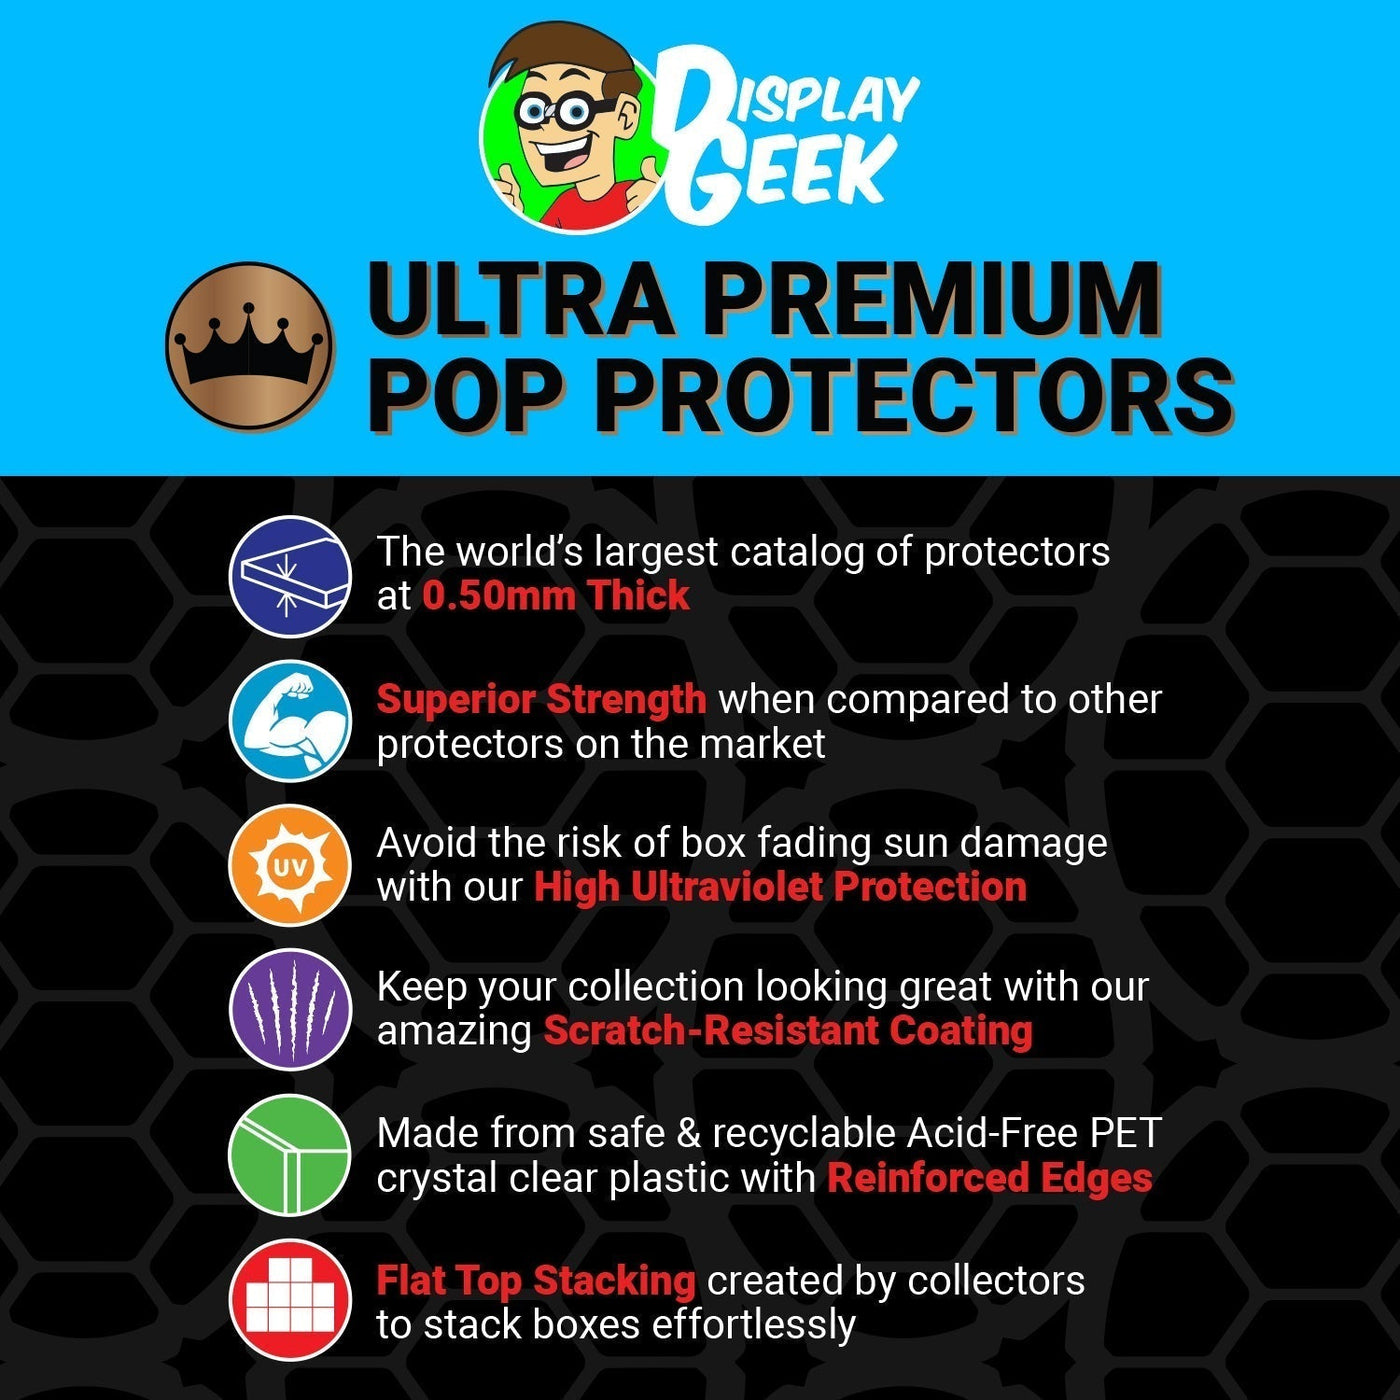 Pop Protector for 6 inch Megazord EE Glow #497 Super Funko Pop on The Protector Guide App by Display Geek